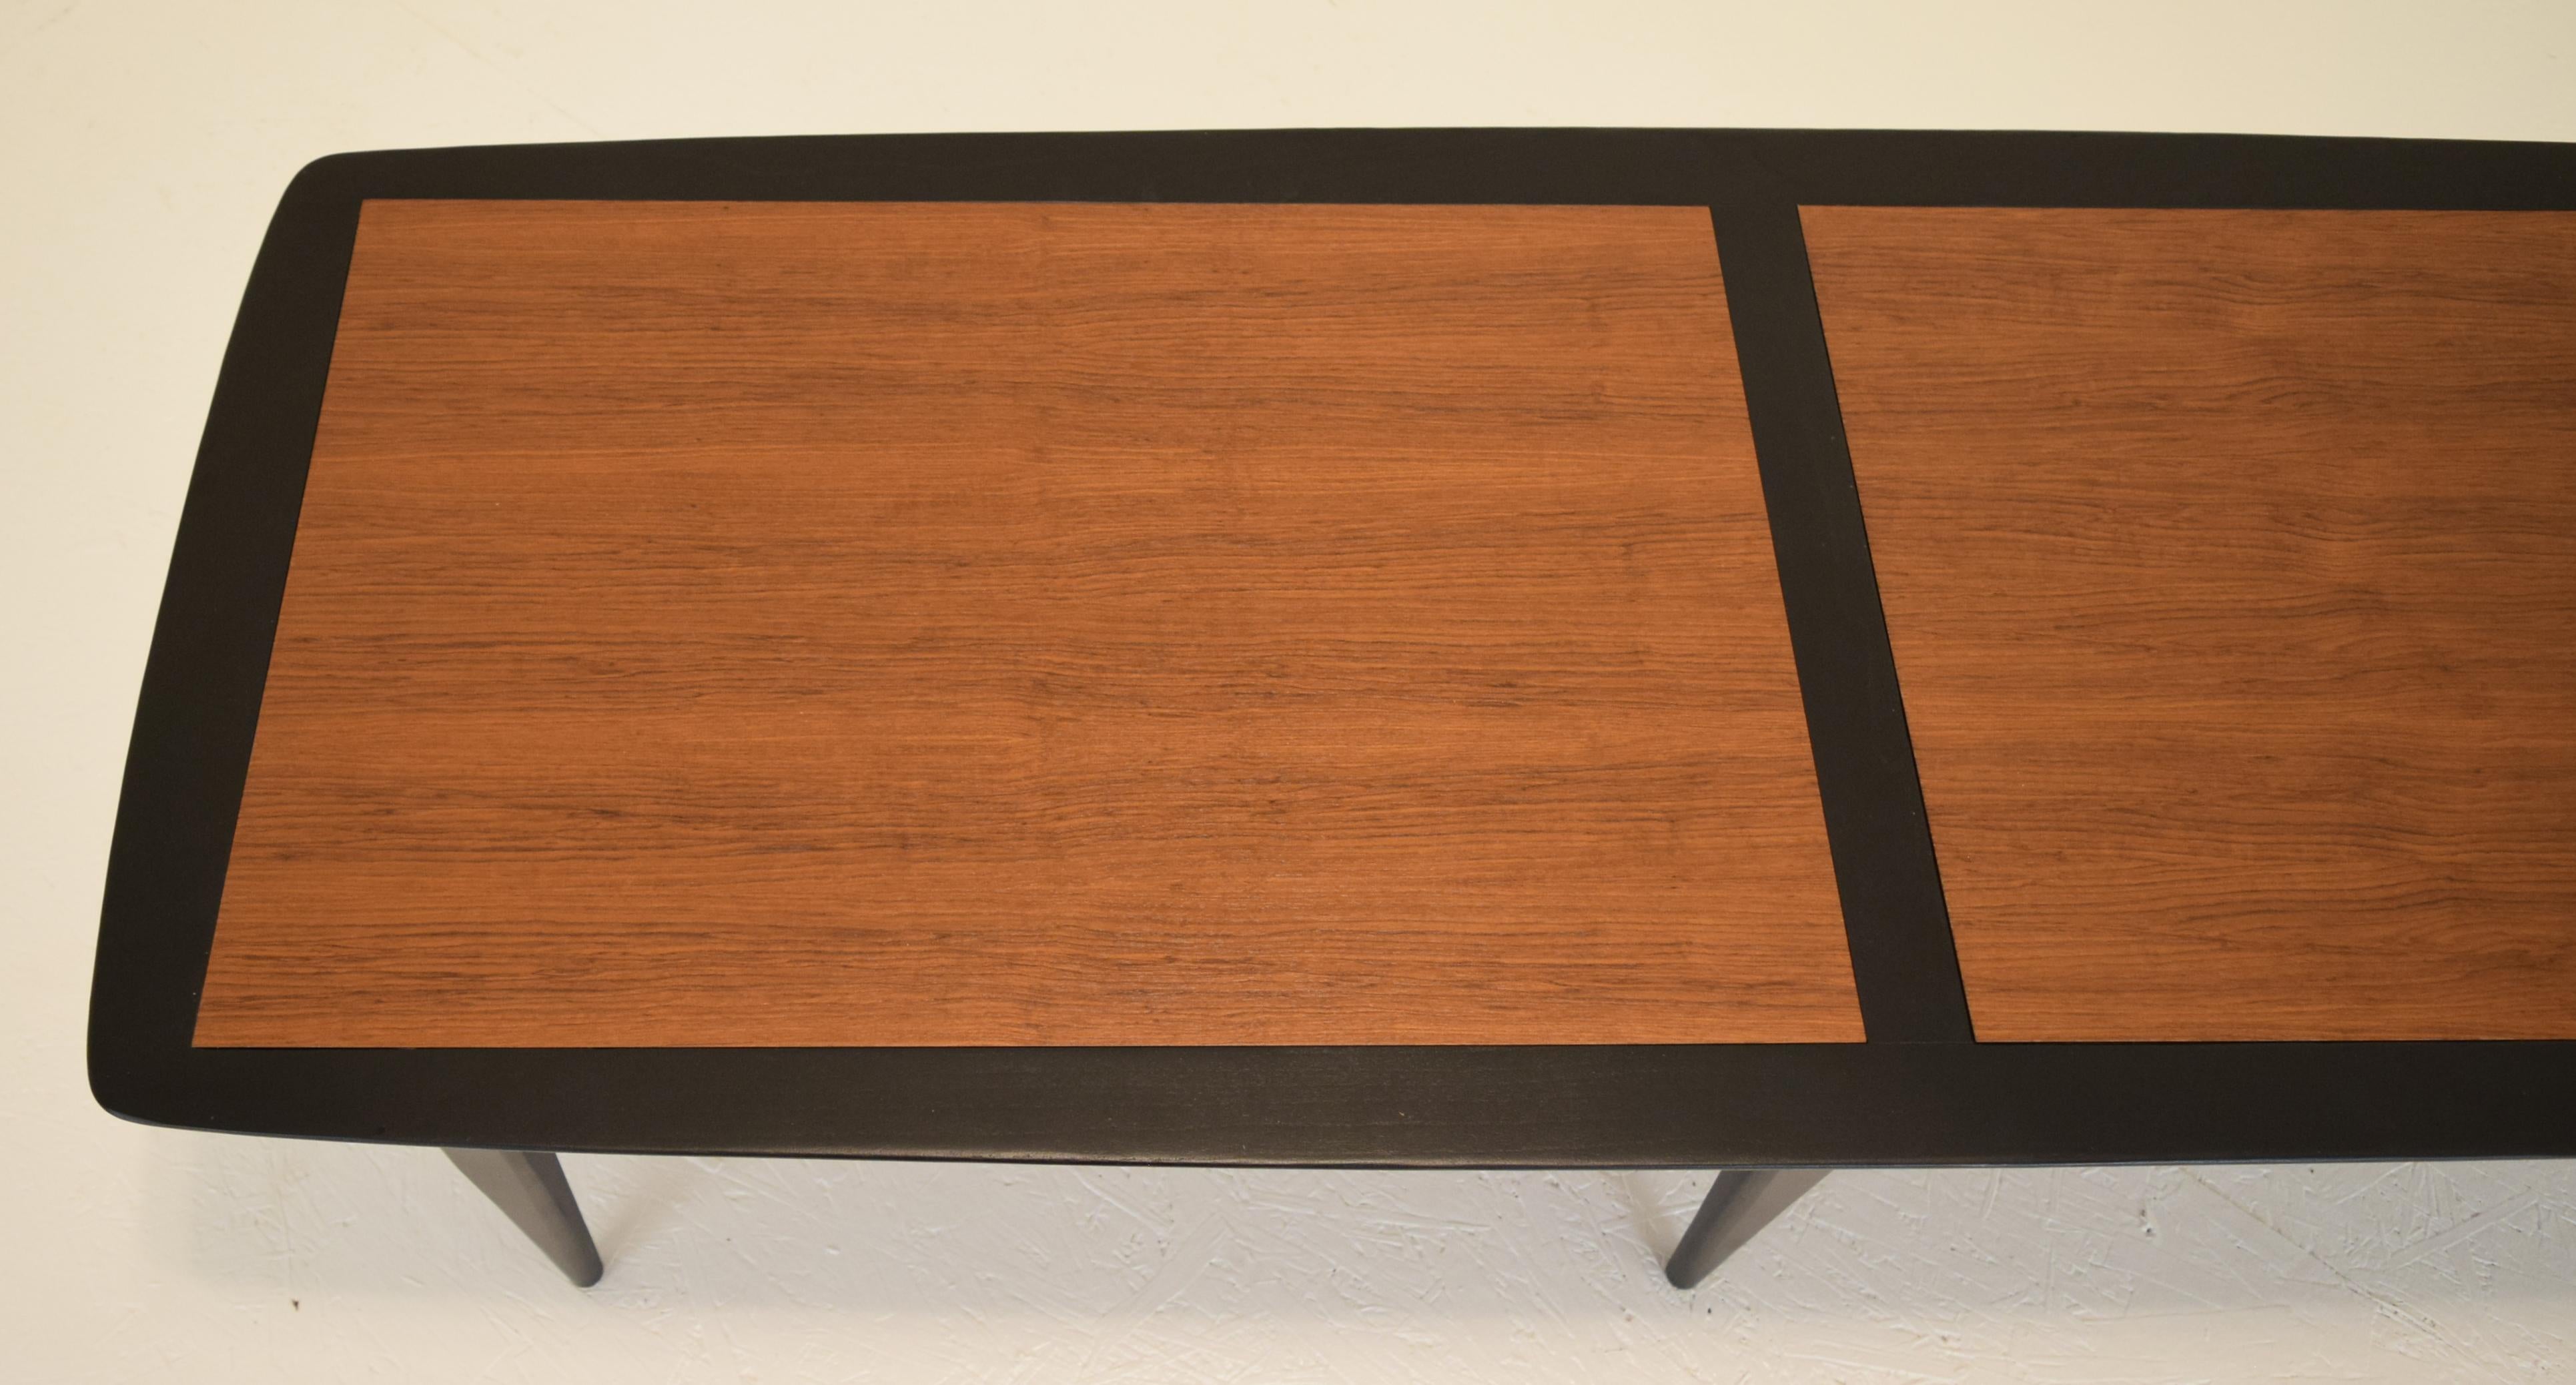 Two-Tone Coffee Table in Teak and Black Lacquer In Excellent Condition For Sale In South Charleston, WV